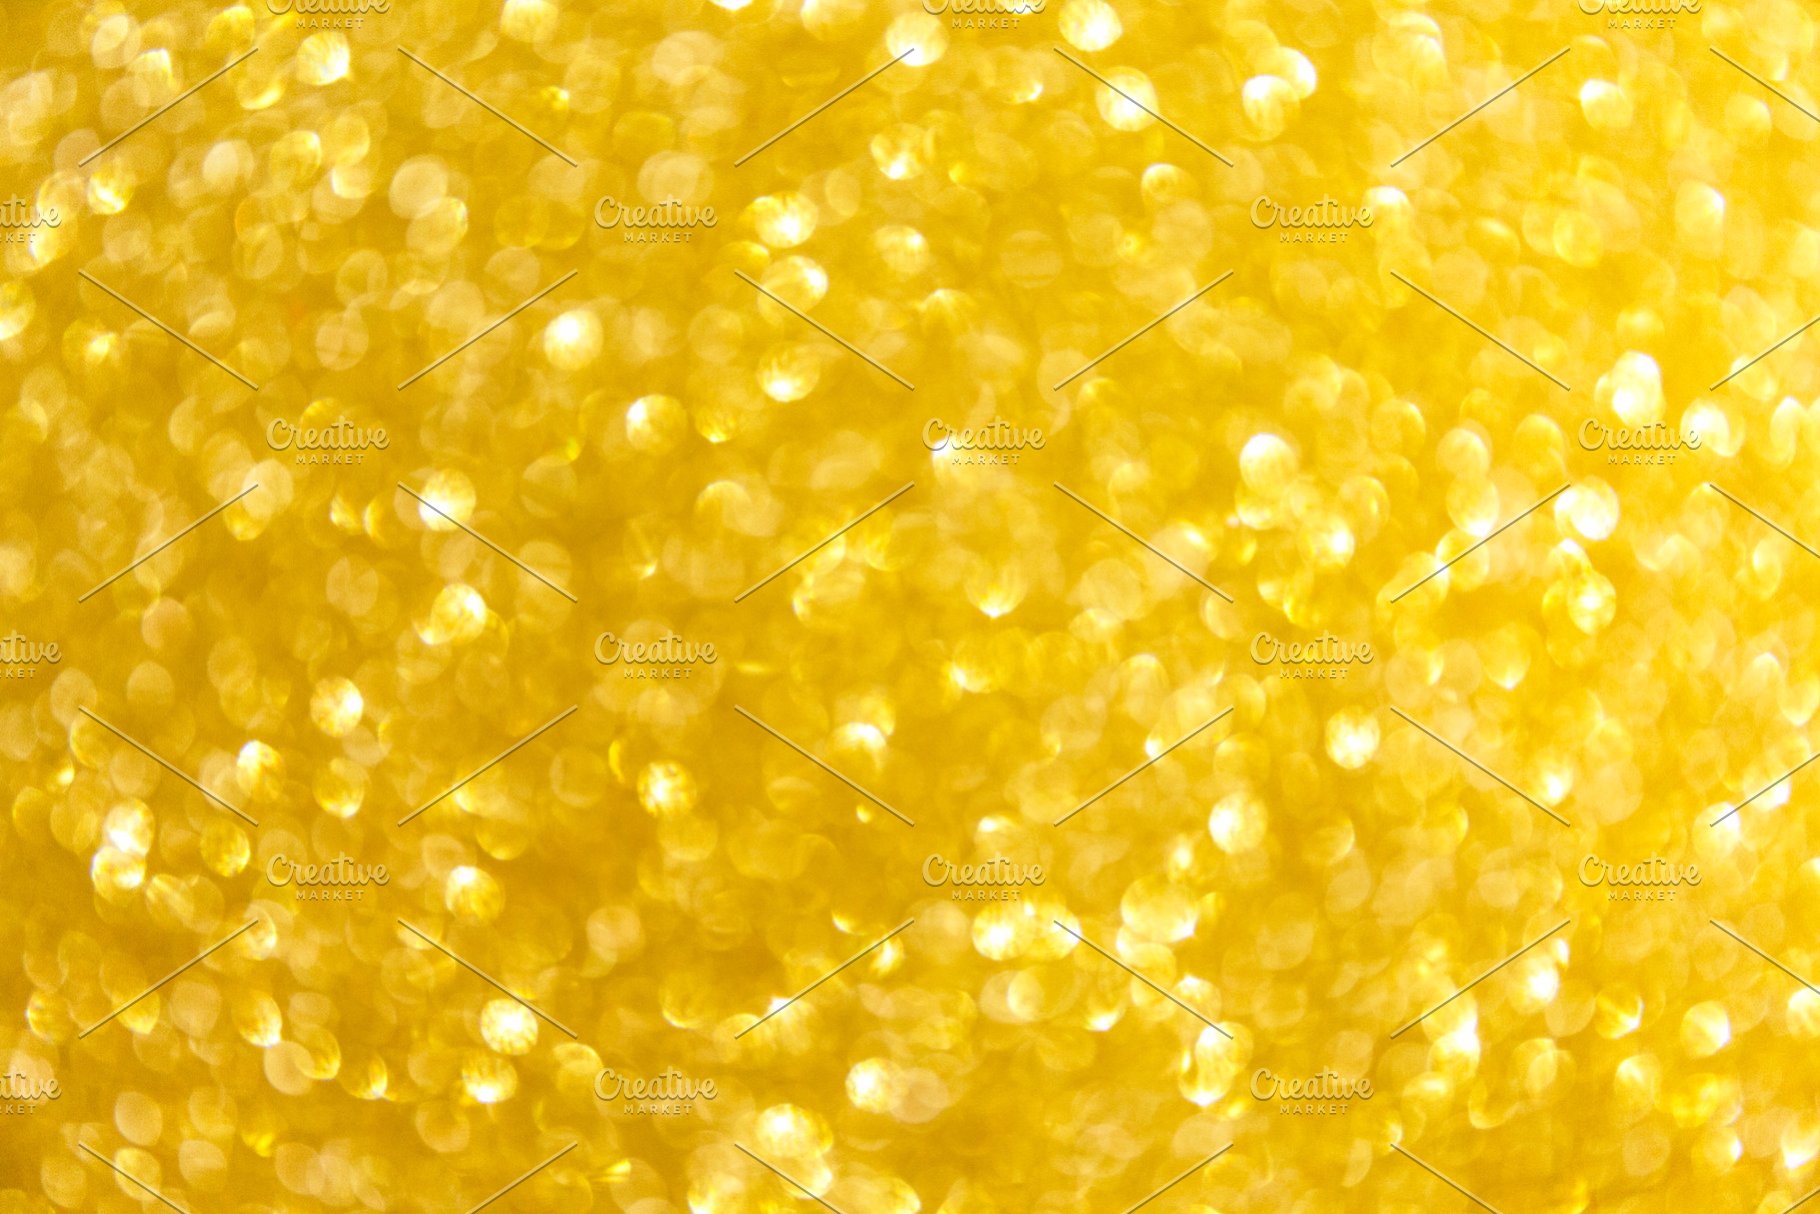 Blurred Glitter Golden Background High Quality Holiday Stock